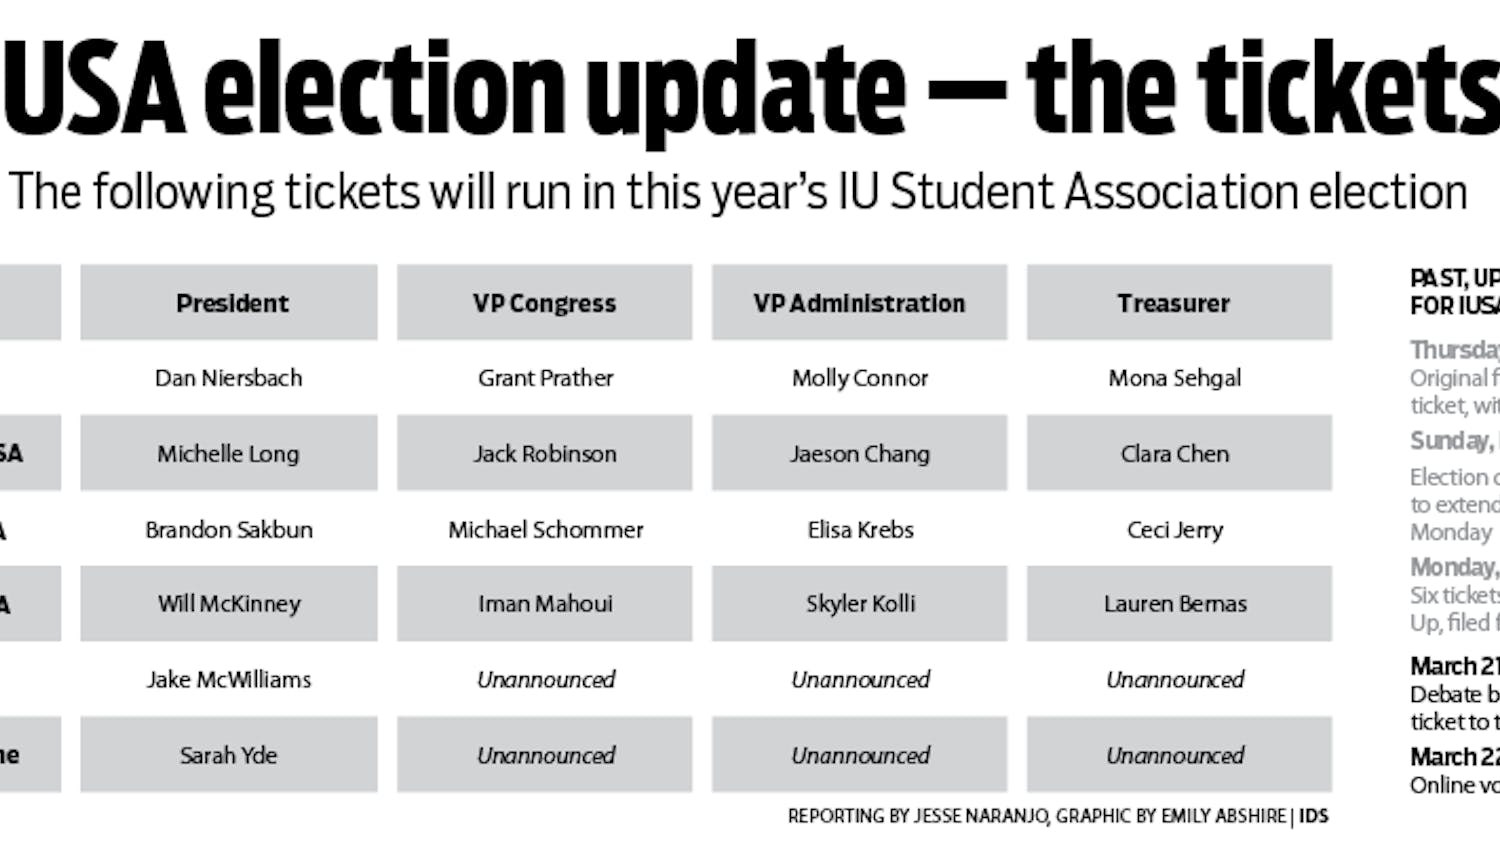 IUSA election update — the tickets